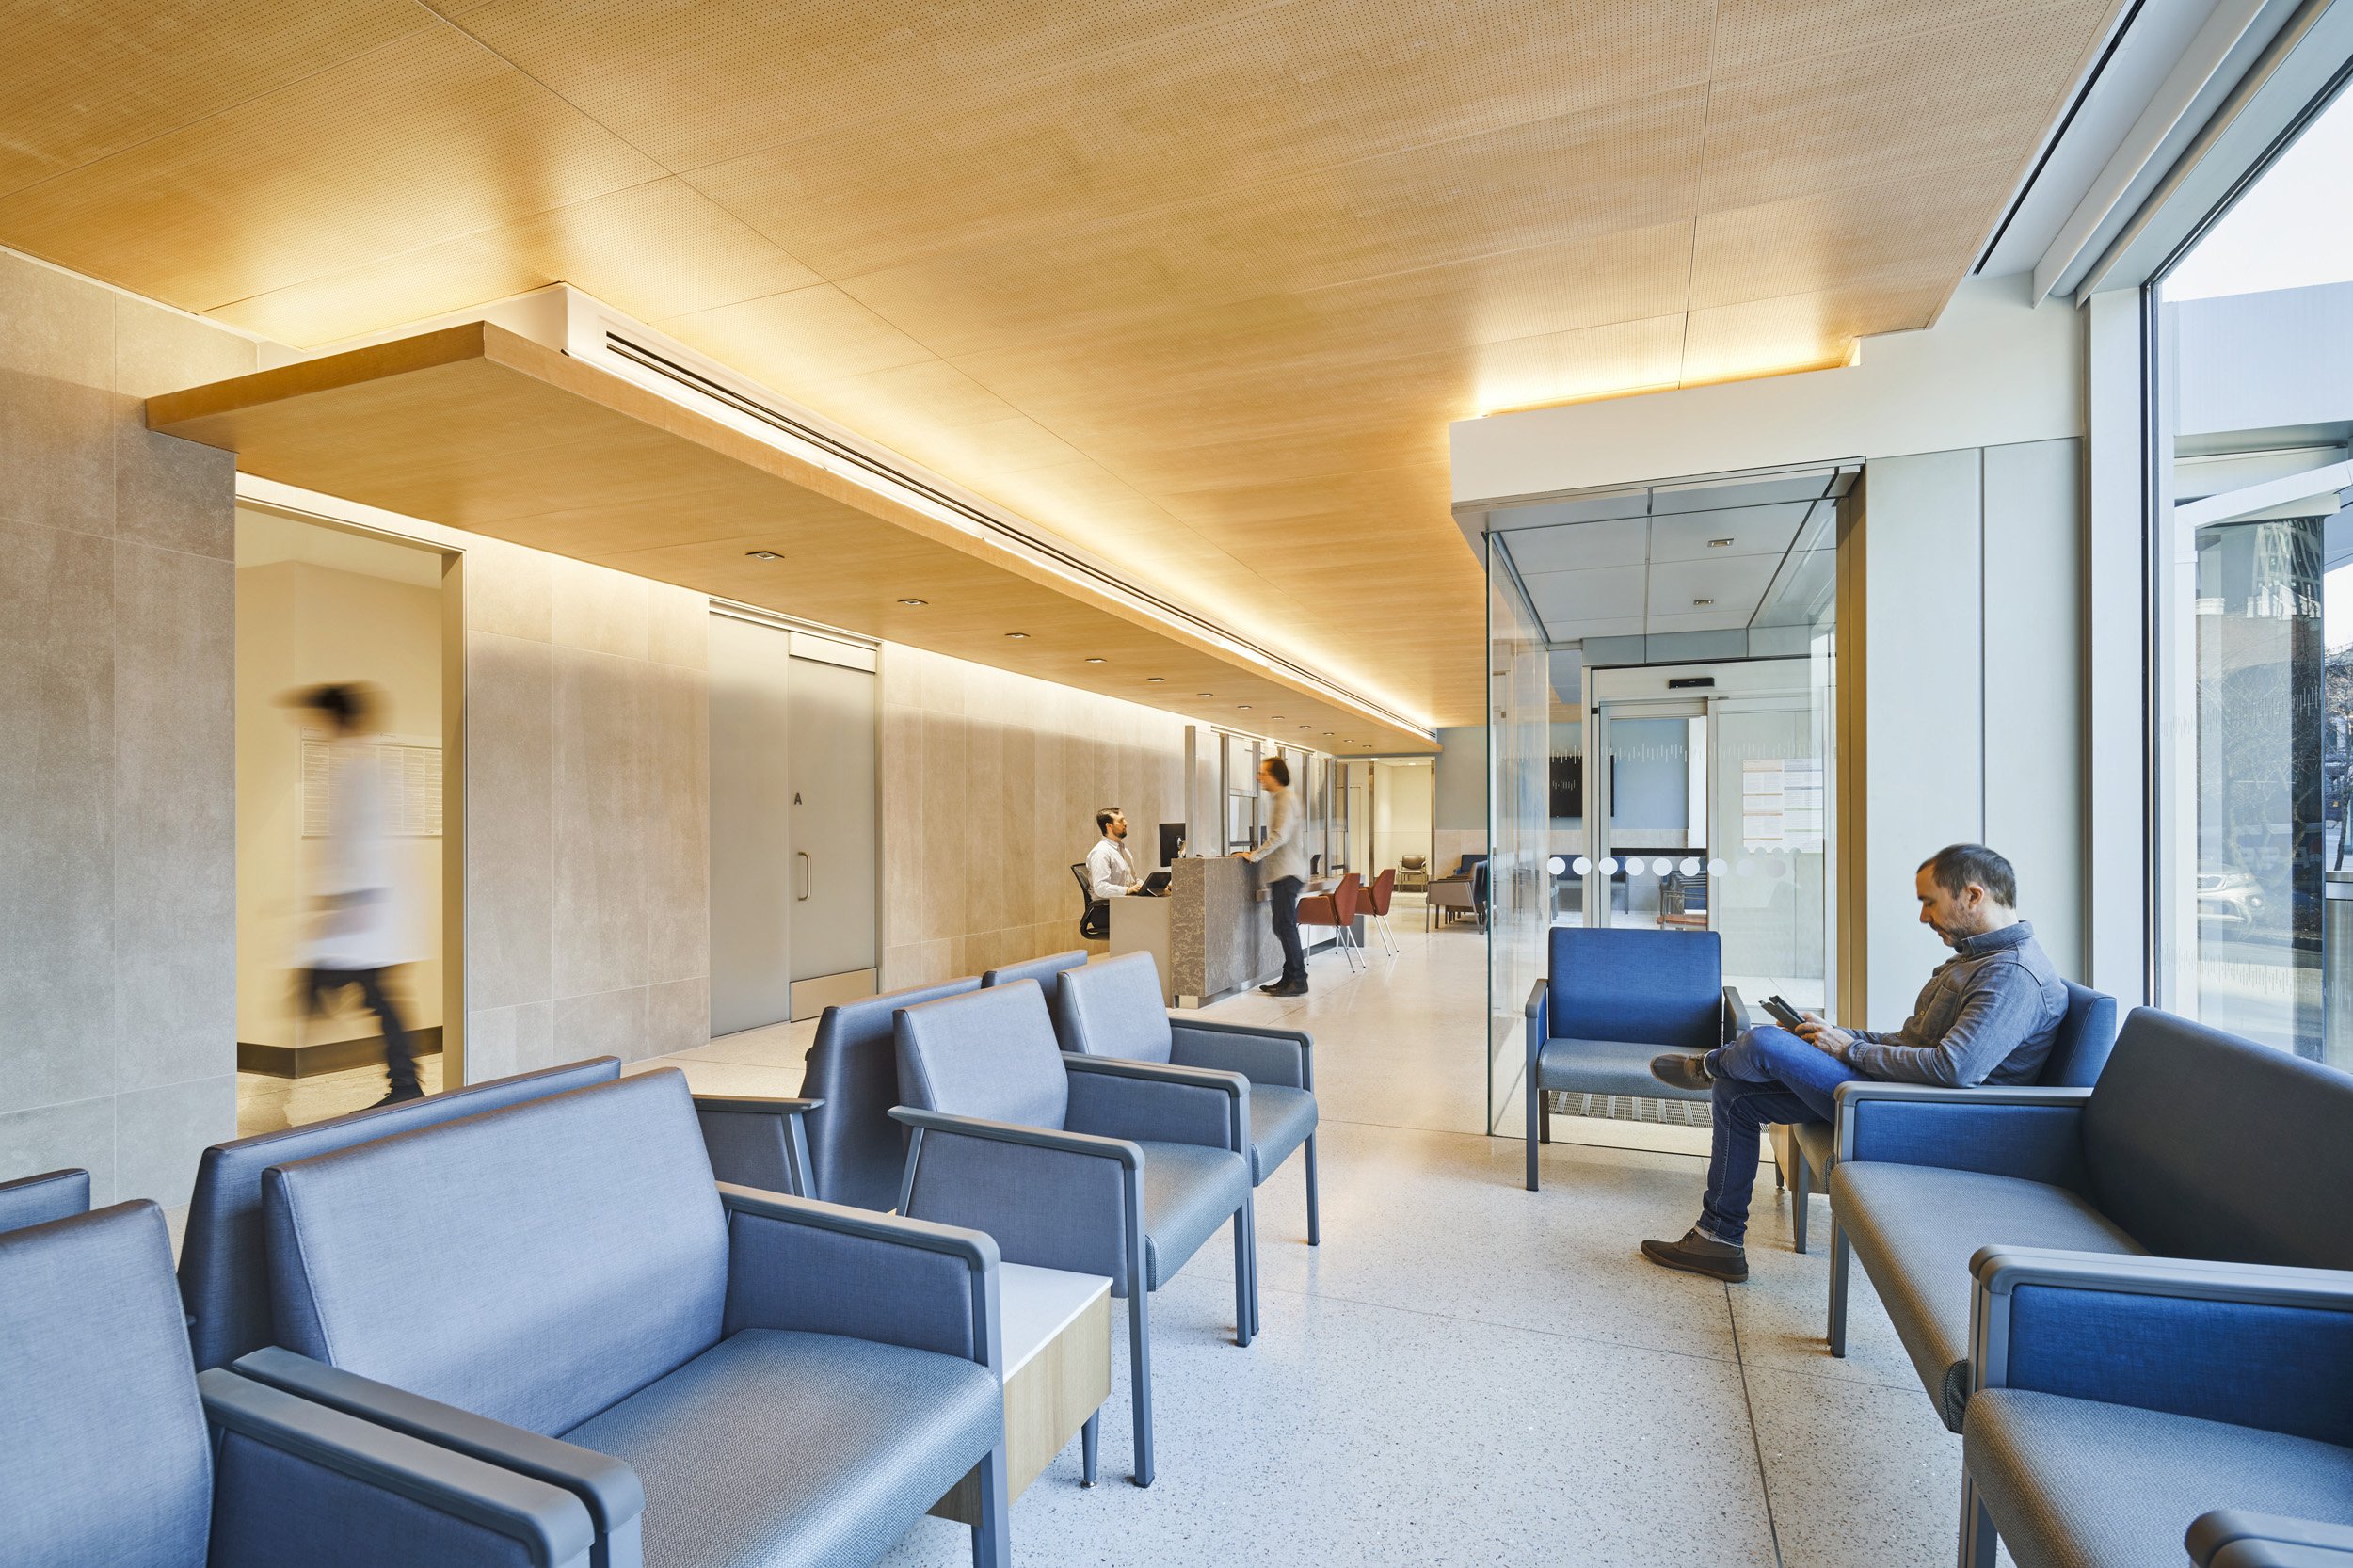 The Brooklyn Hospital Center Emergency Department Expansion and Renovation